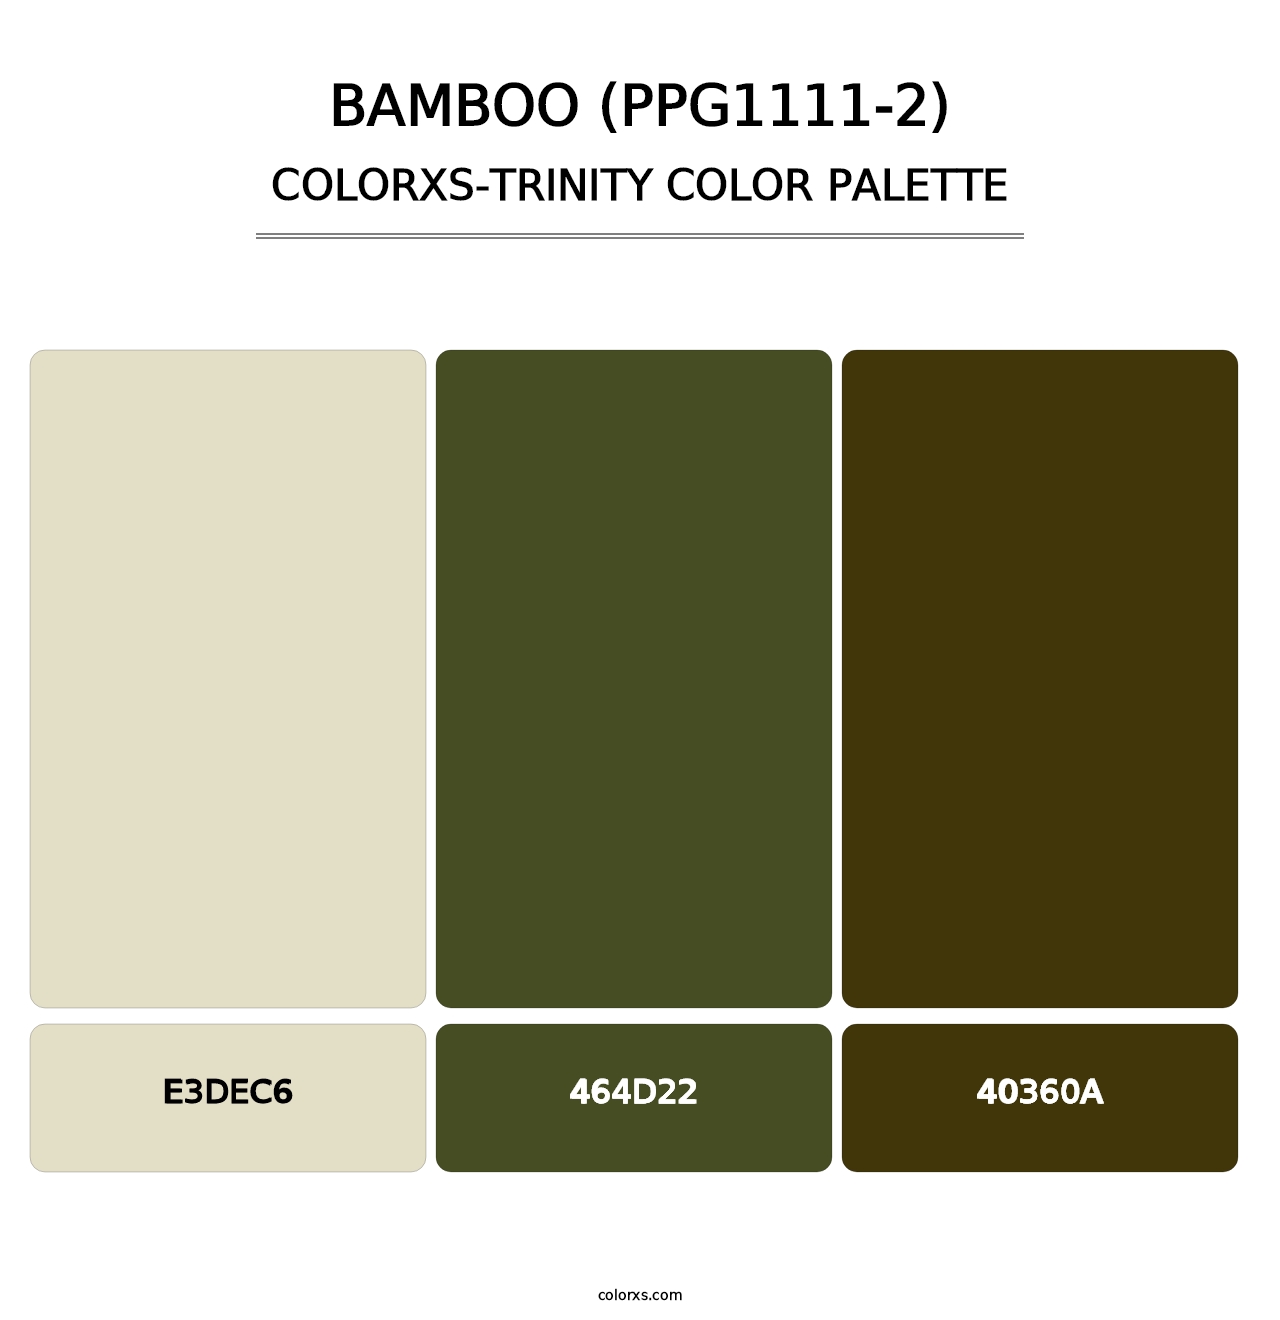 Bamboo (PPG1111-2) - Colorxs Trinity Palette